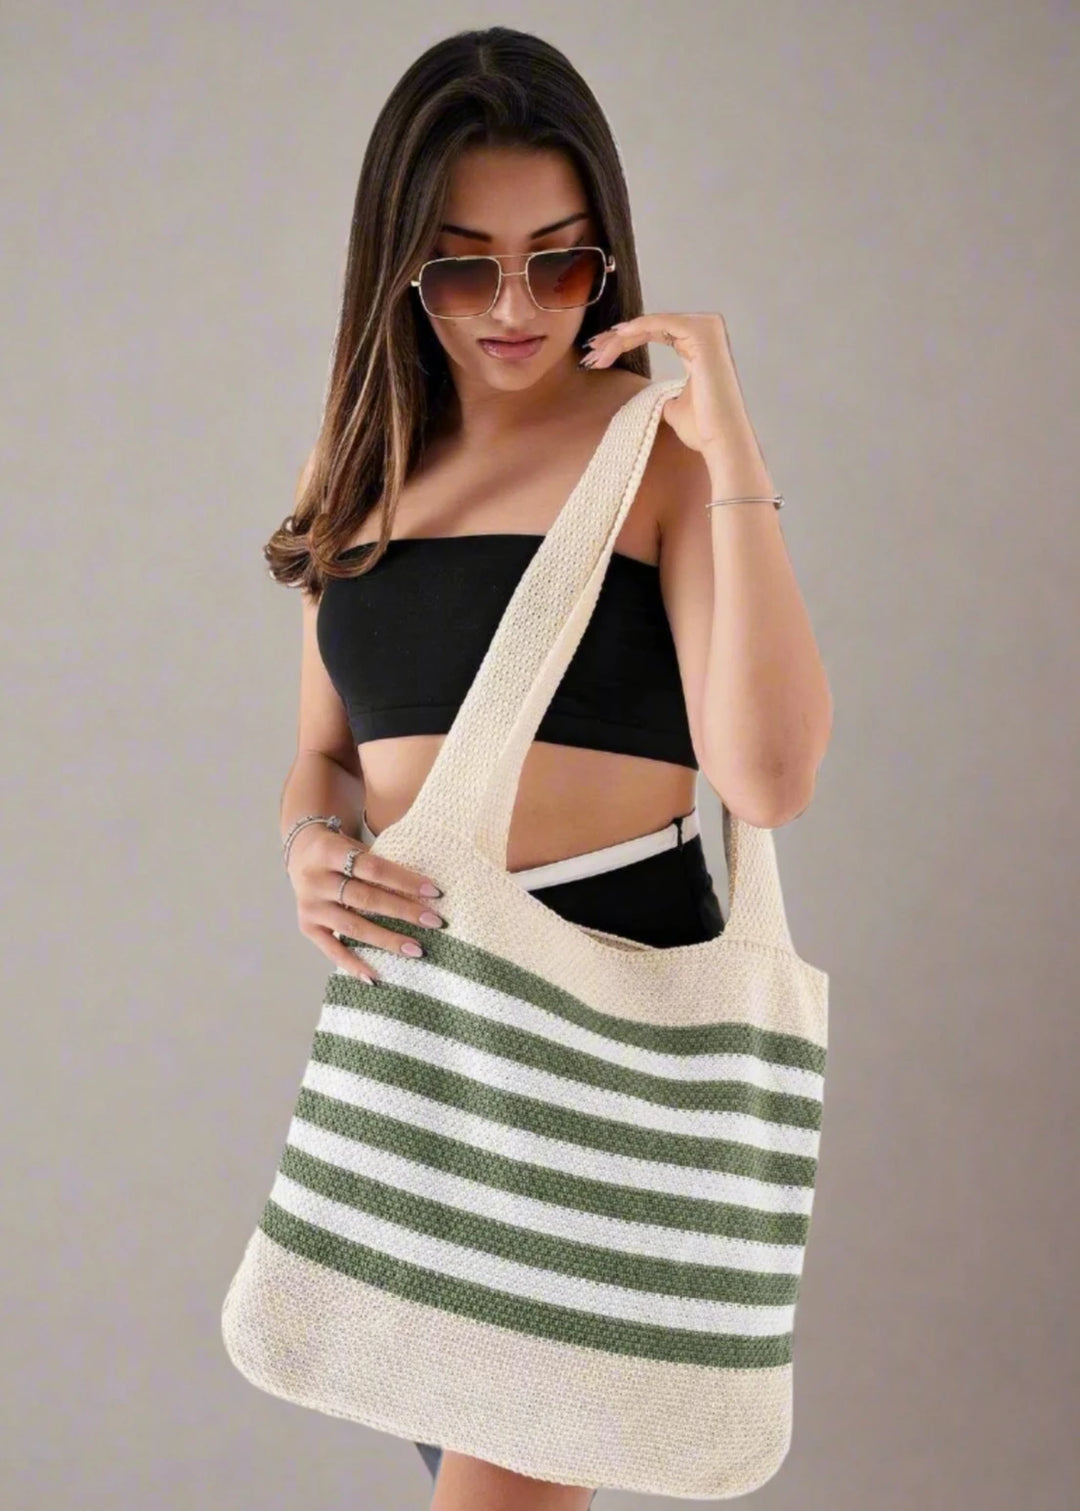 Pique Knitted Knitwear Shopper Strap Hand & Shoulder Casual and Beach Bag